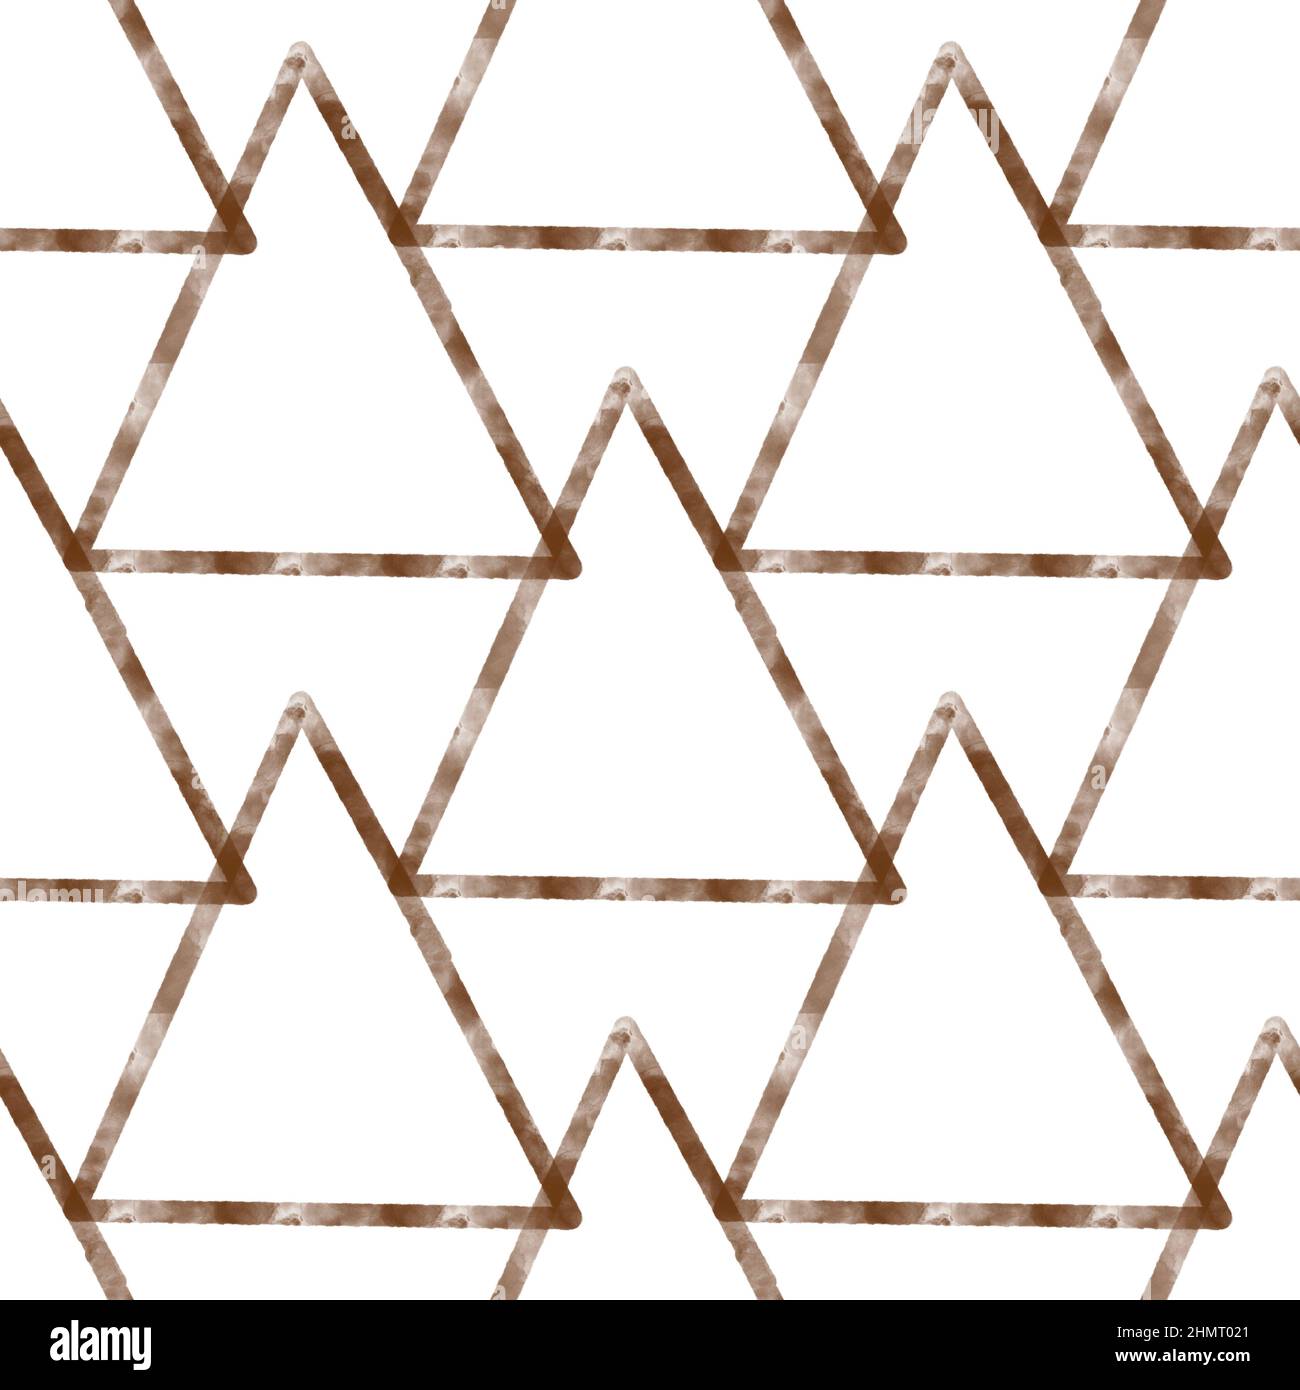 Triangle pattern Cut Out Stock Images & Pictures - Alamy